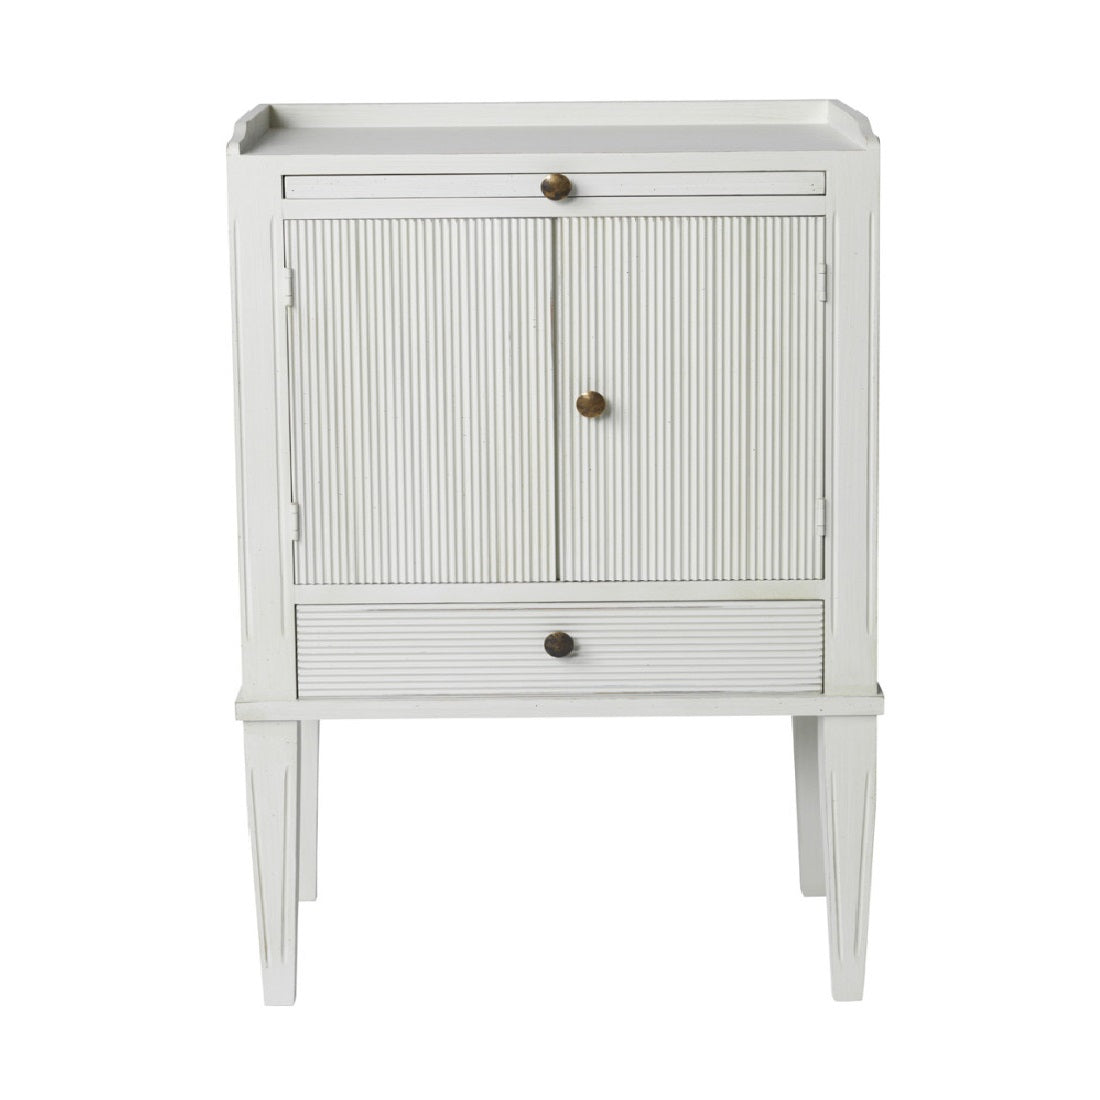 Gustavian painted furniture - bedside cabinet - painted finish